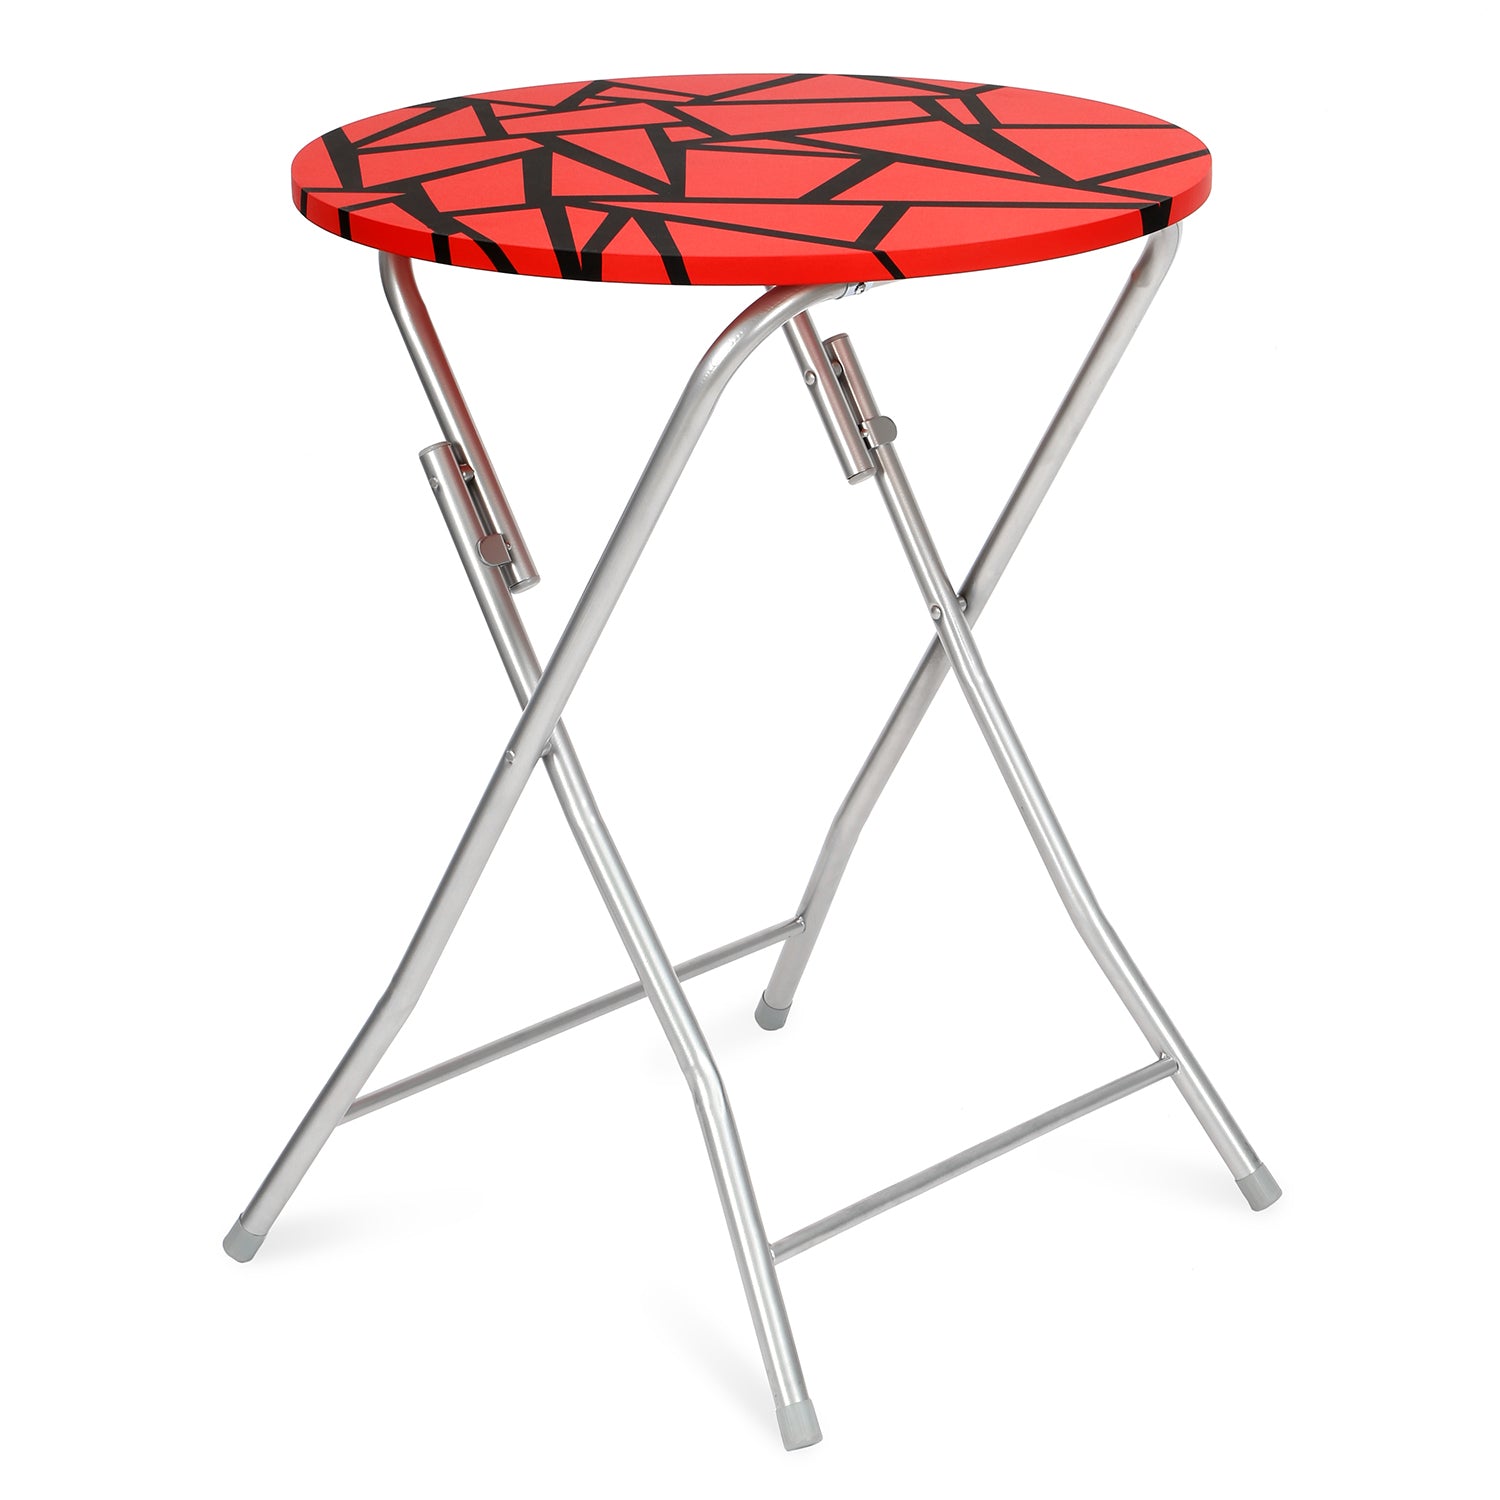 Jax Foldable Round Table (Red and Black)